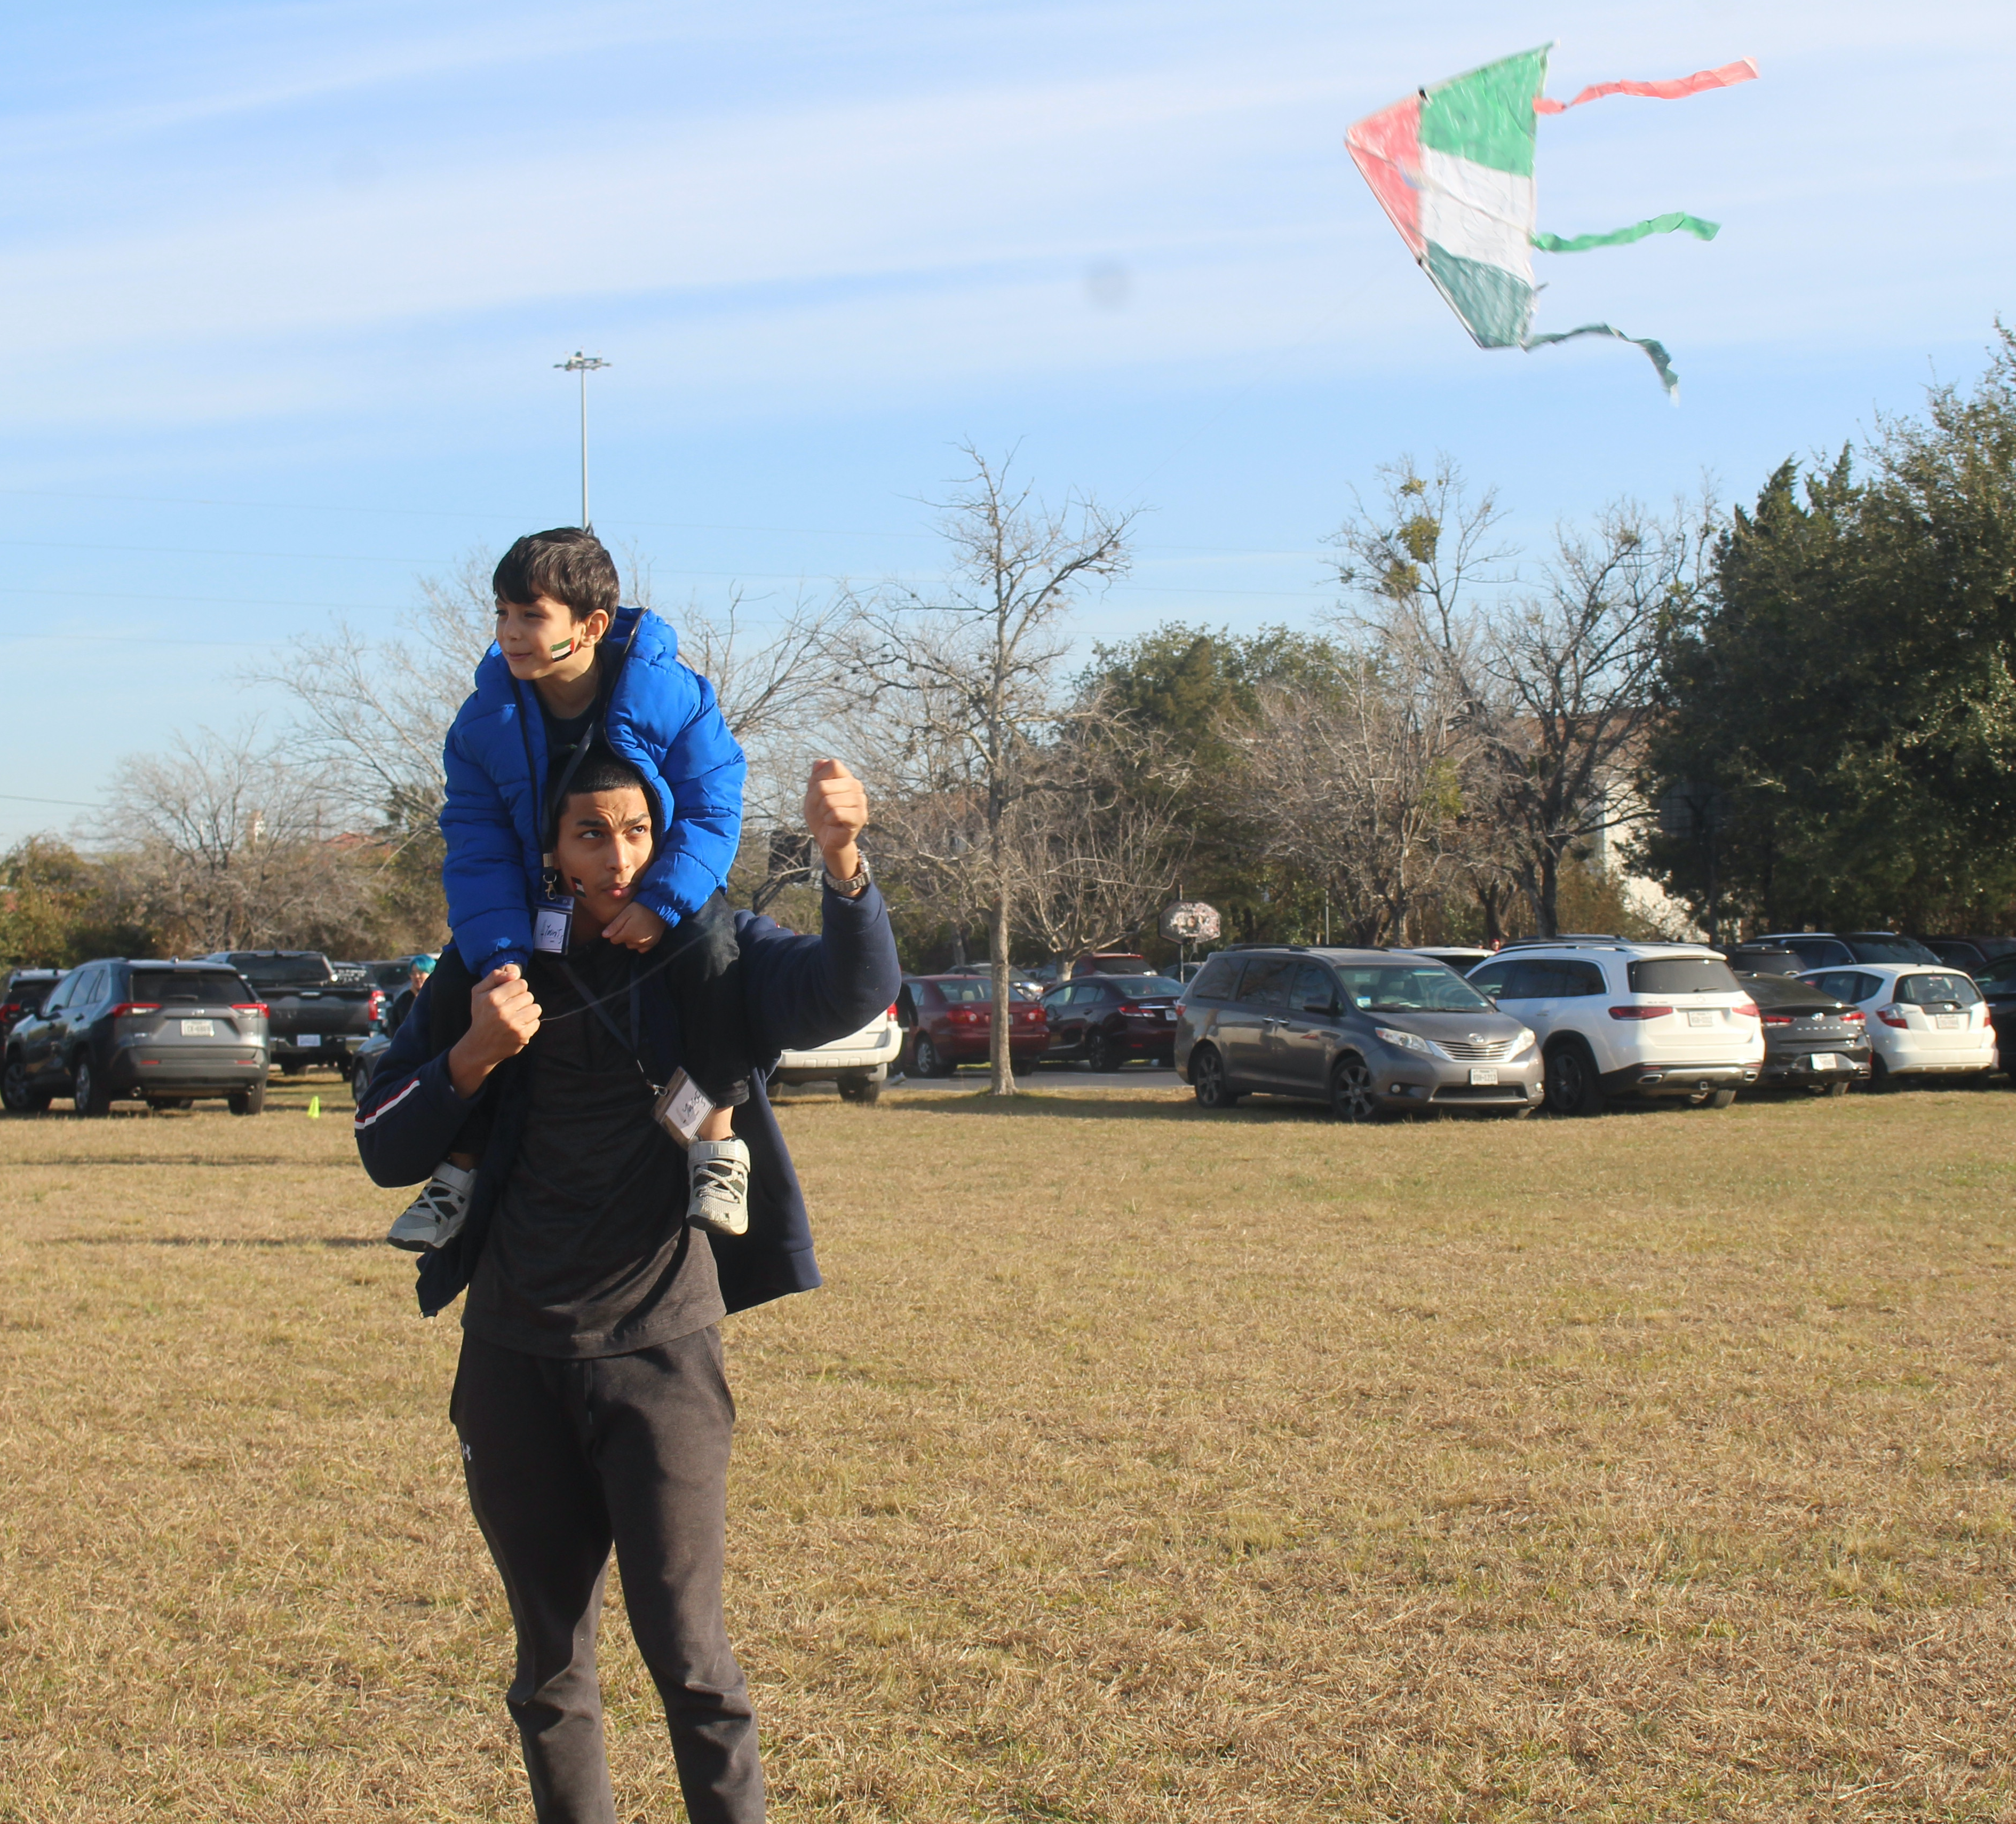 Junior Yousef Salem flies a kite decorated with the colors of the Palestinian flag with his younger brother Younis, who is in first grade, on his shoulders. In Refaat Alareers poem If I Must Die, kites are a symbol of hope for Palestinian children.